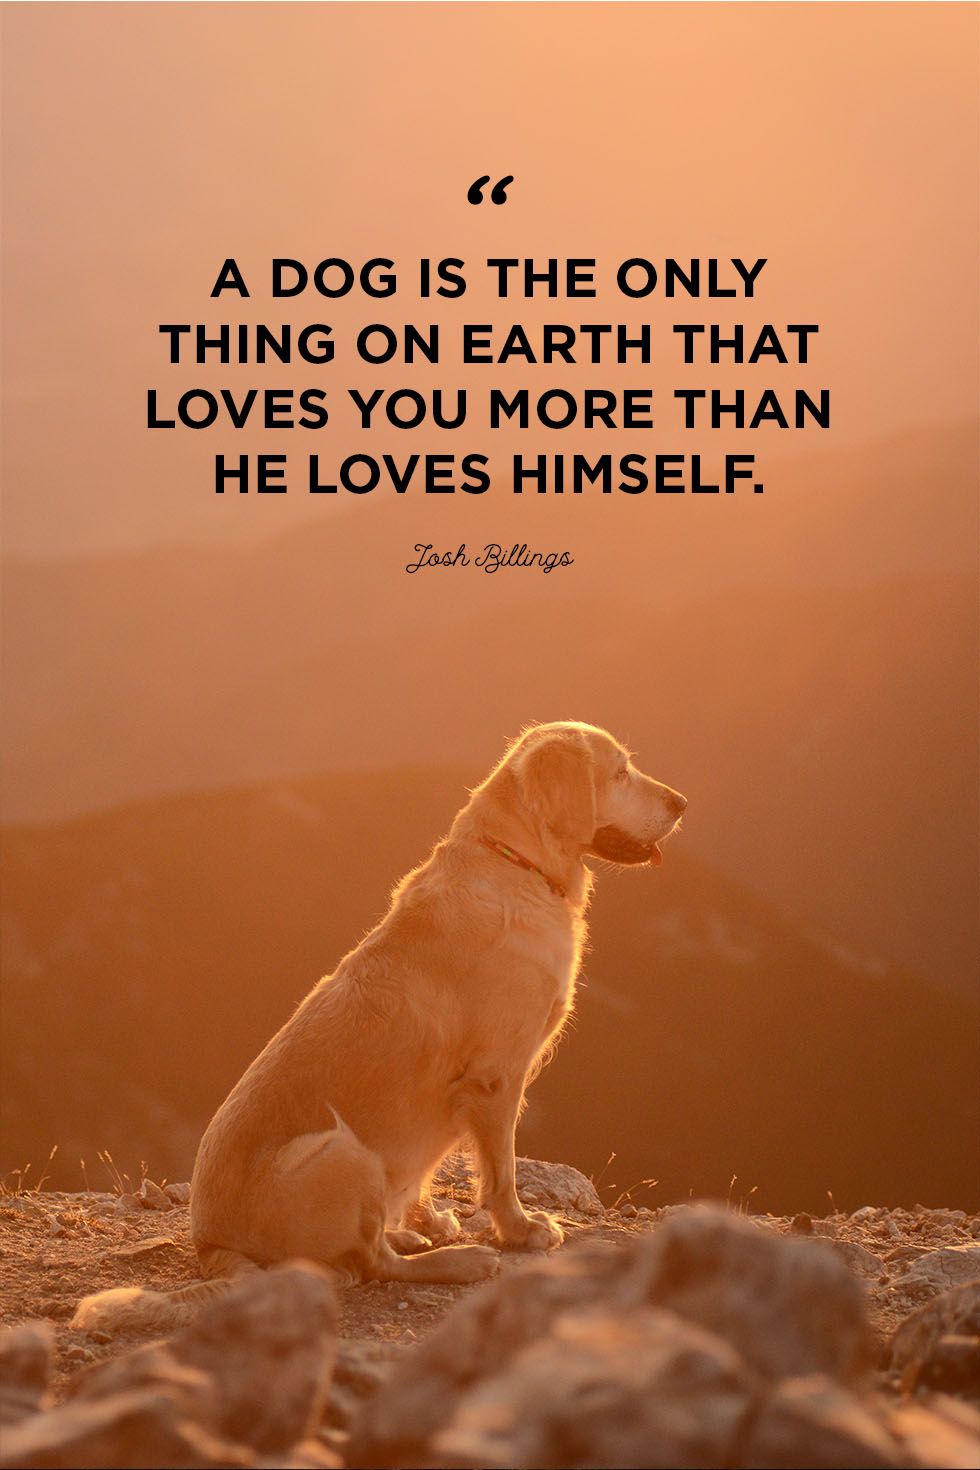 Thoughts of a dog lover